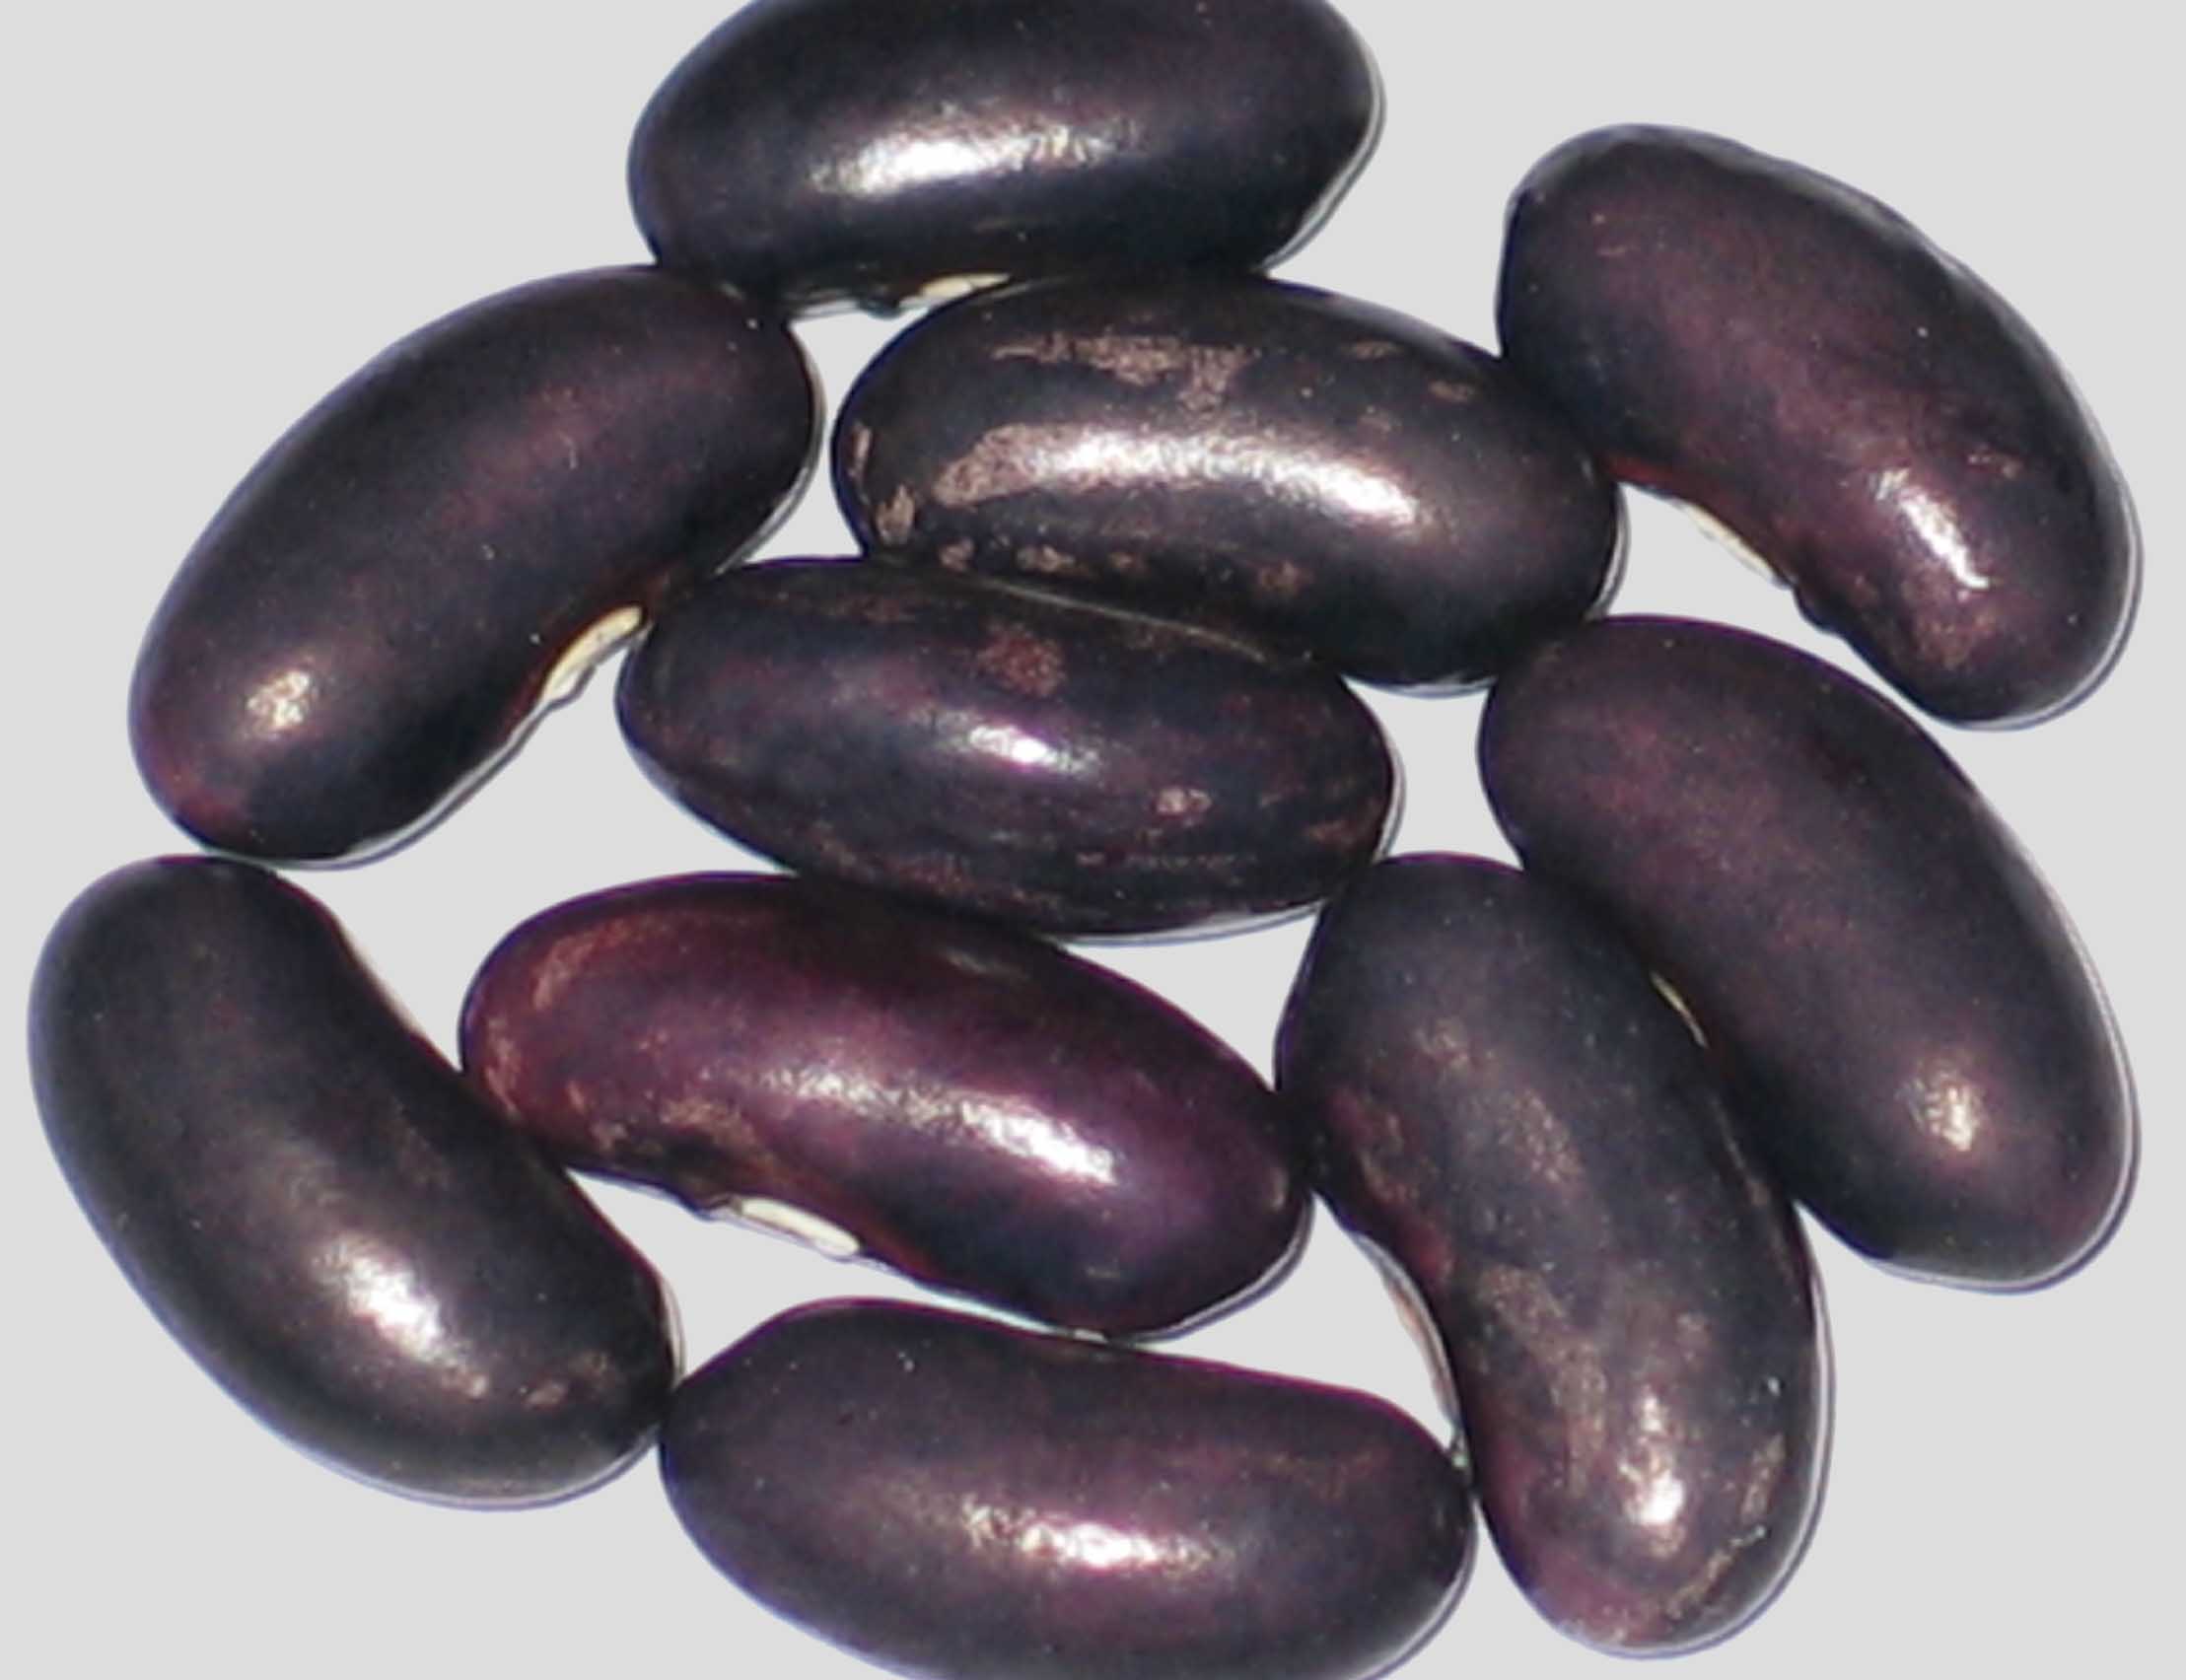 image of Anderson's Wonder beans